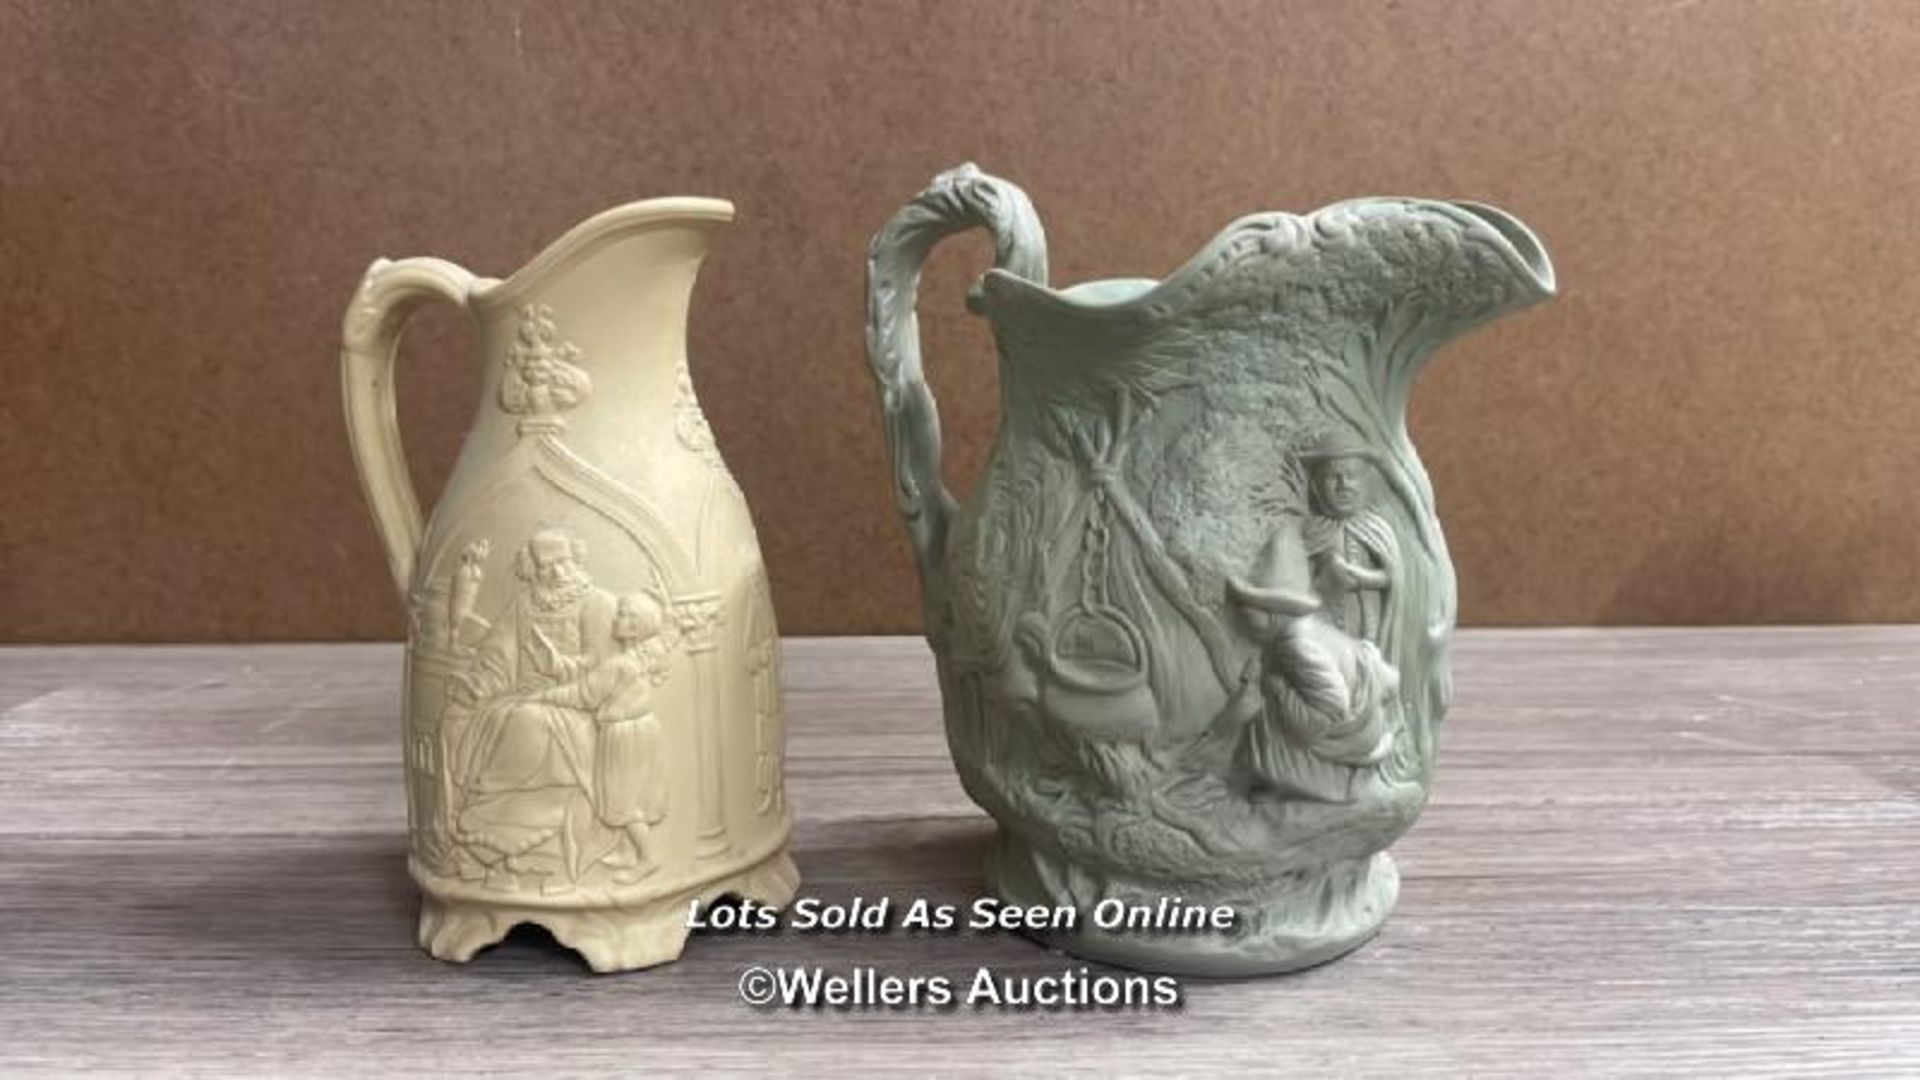 JONES & WALLEY GIPSEY RELIEF MOULDED JUG; RIDGWAY RELIEF MOULDED JUG AND FOUR SIMILAR EXAMPLES - Image 2 of 8